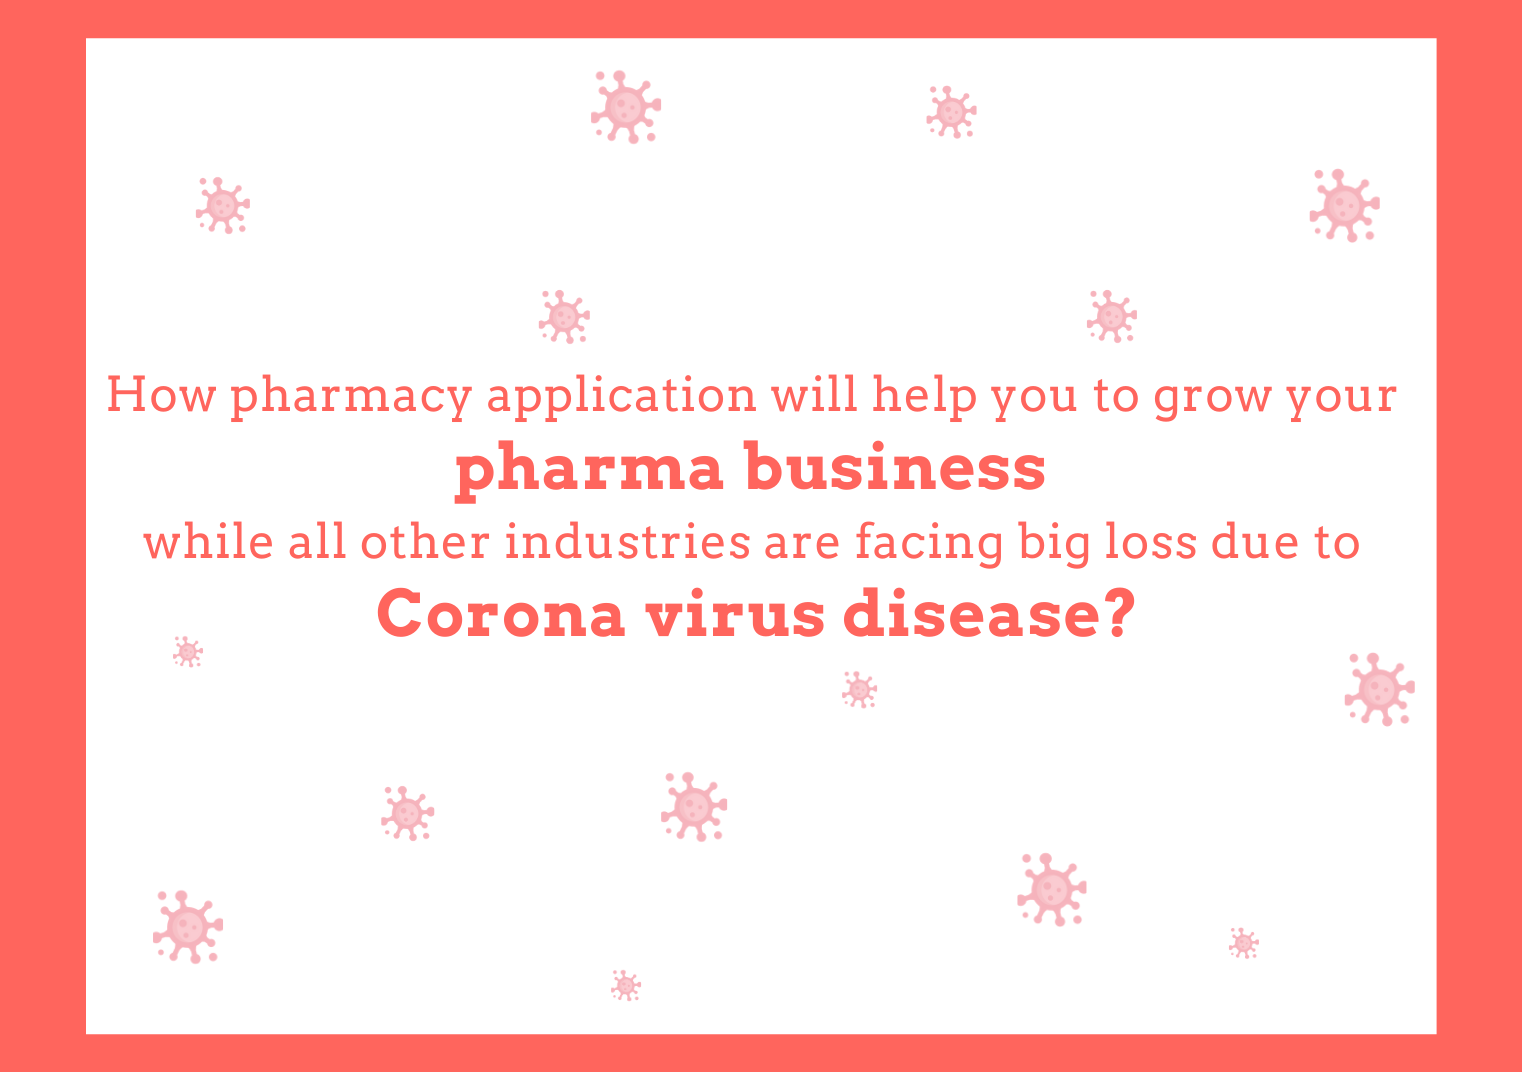 How pharmacy application will help you to grow your pharma business while all other industries are facing big loss due to Corona virus disease?